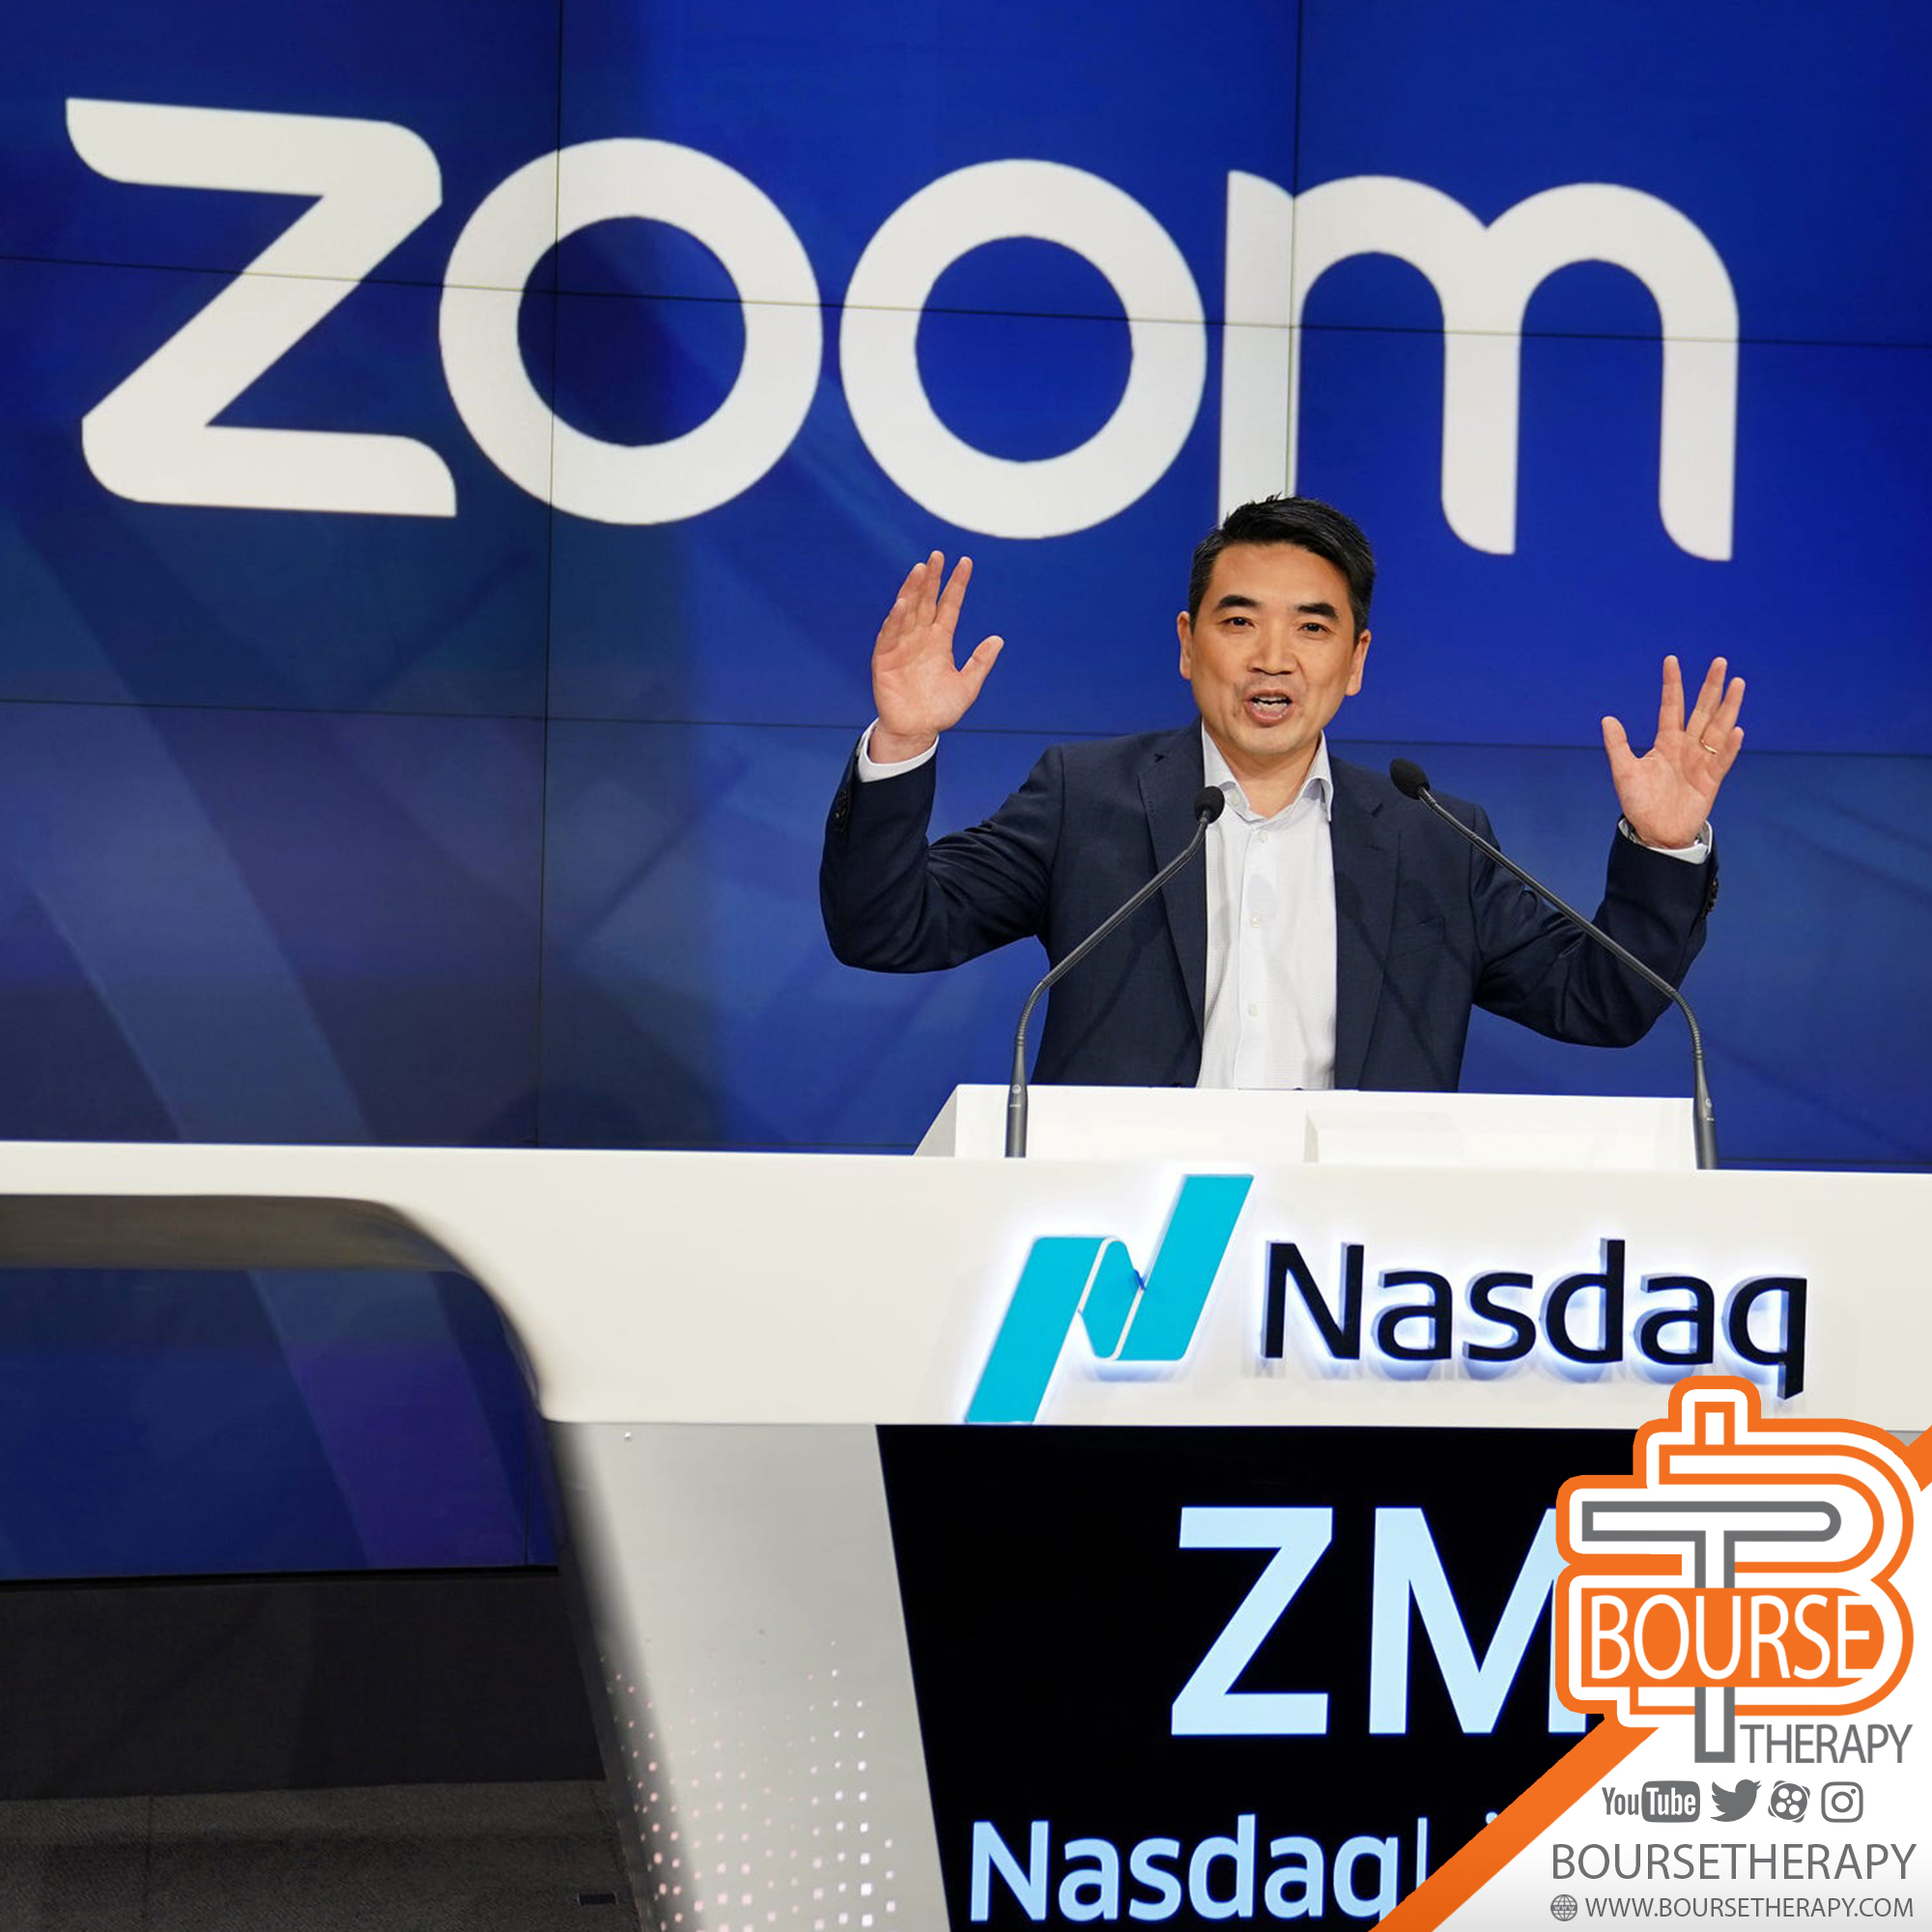 Zoom and other ‘stay-at-home’ stocks got crushed